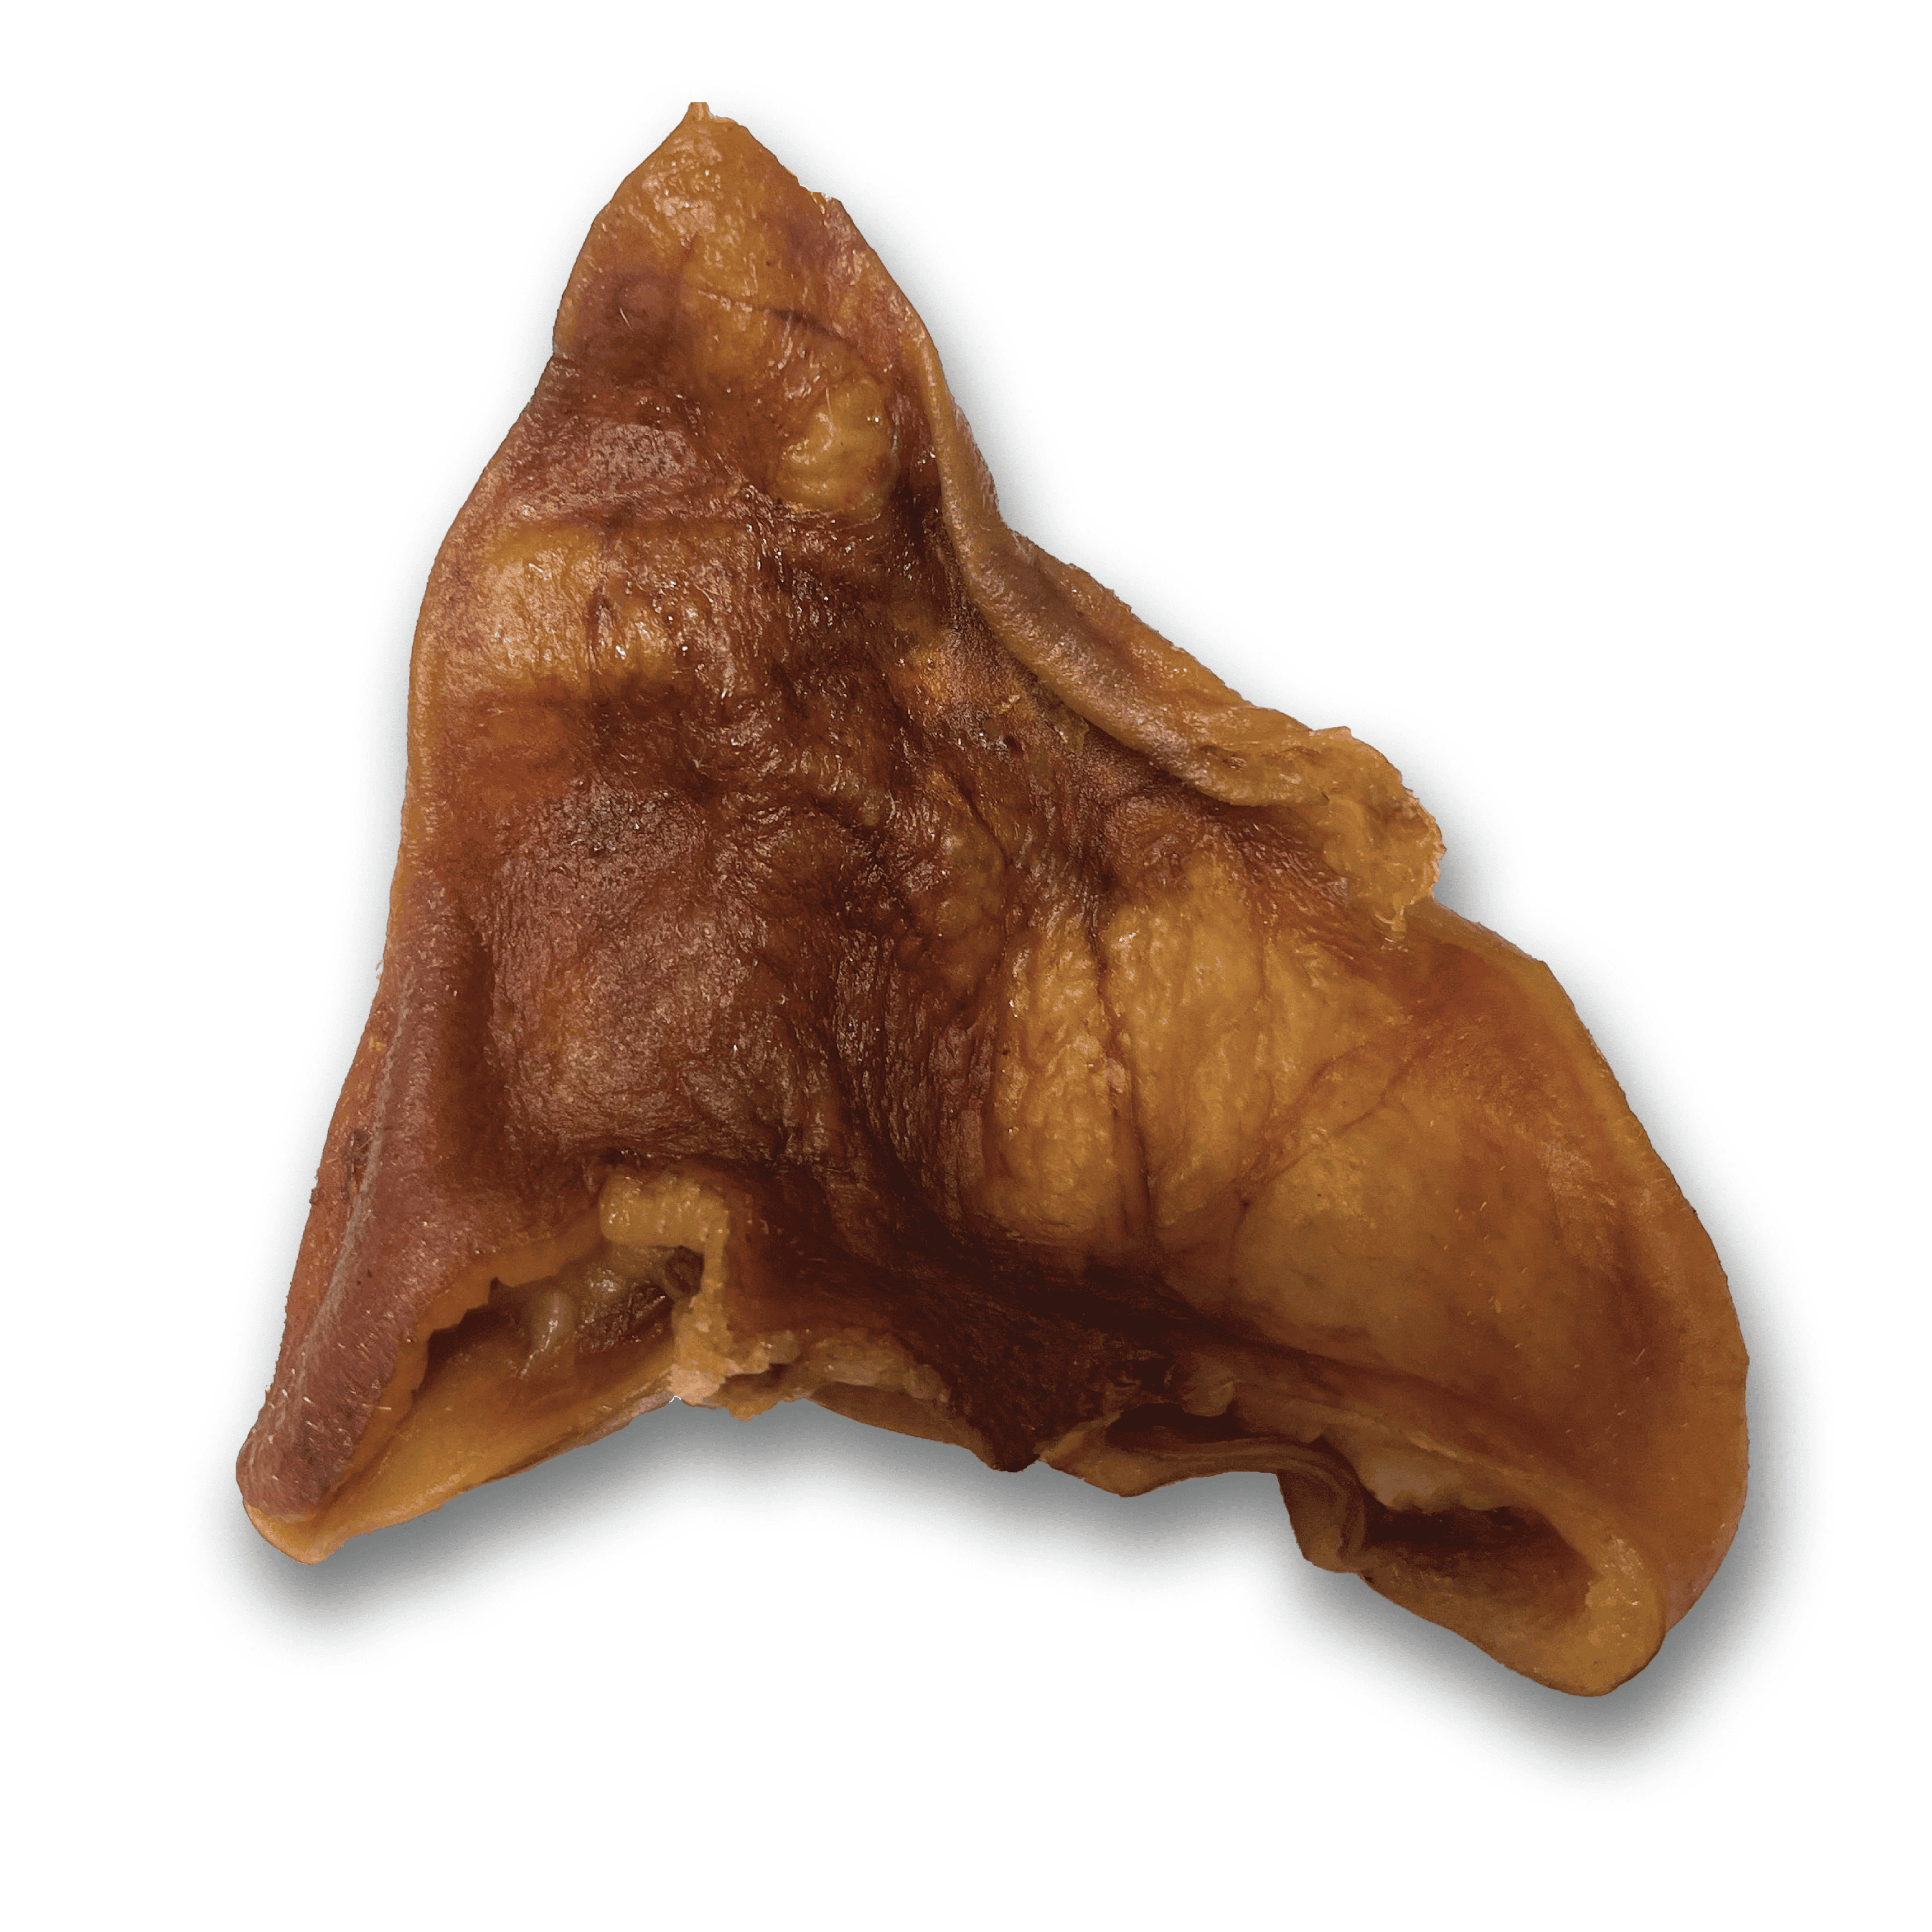 Are Pigs Ears Safe For Dogs?